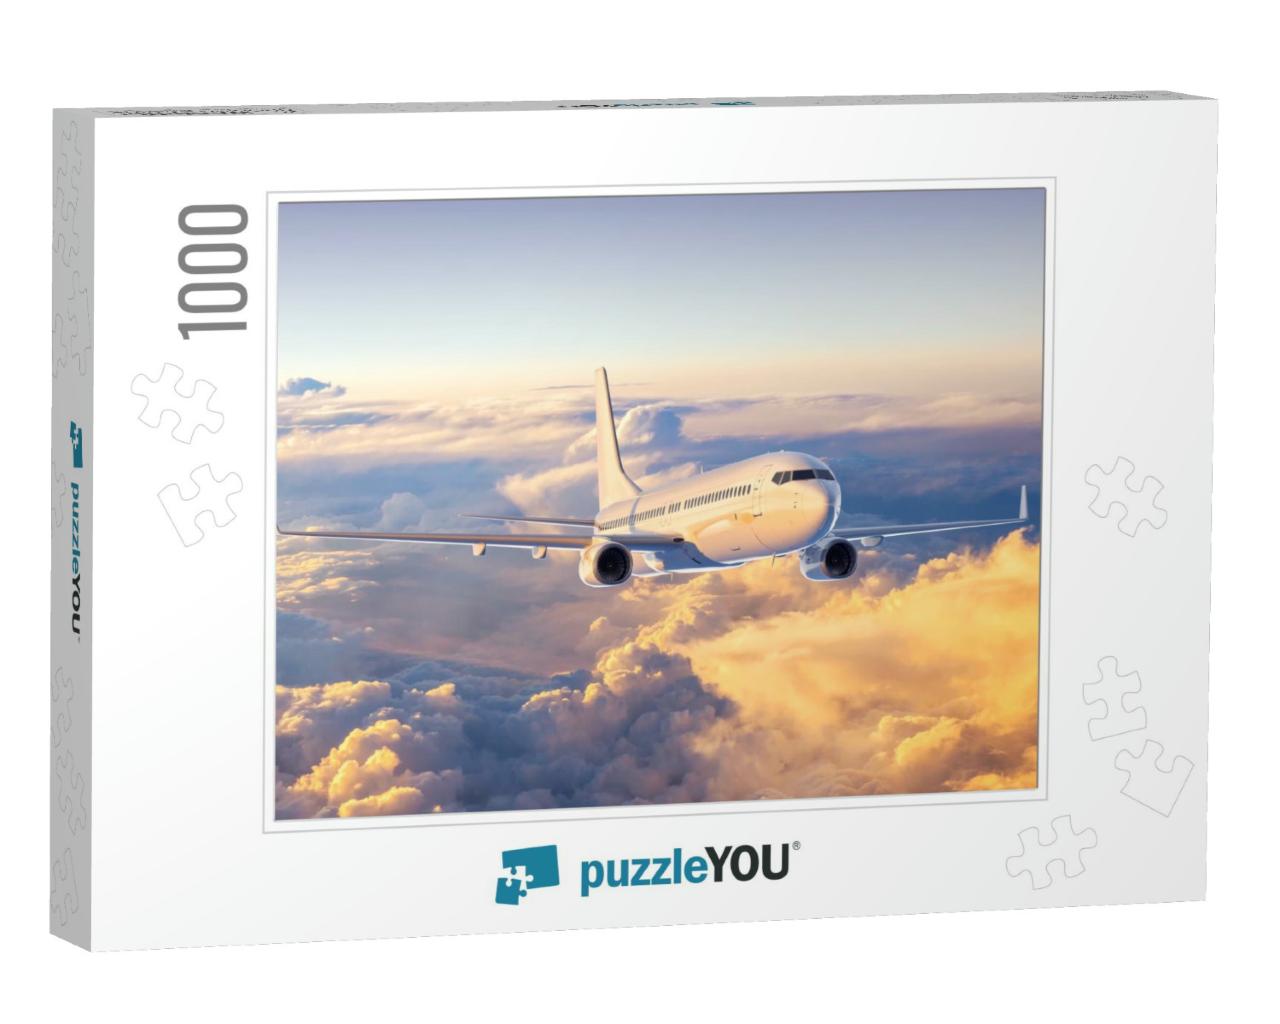 Airplane in the Sky, 3D Rendering... Jigsaw Puzzle with 1000 pieces